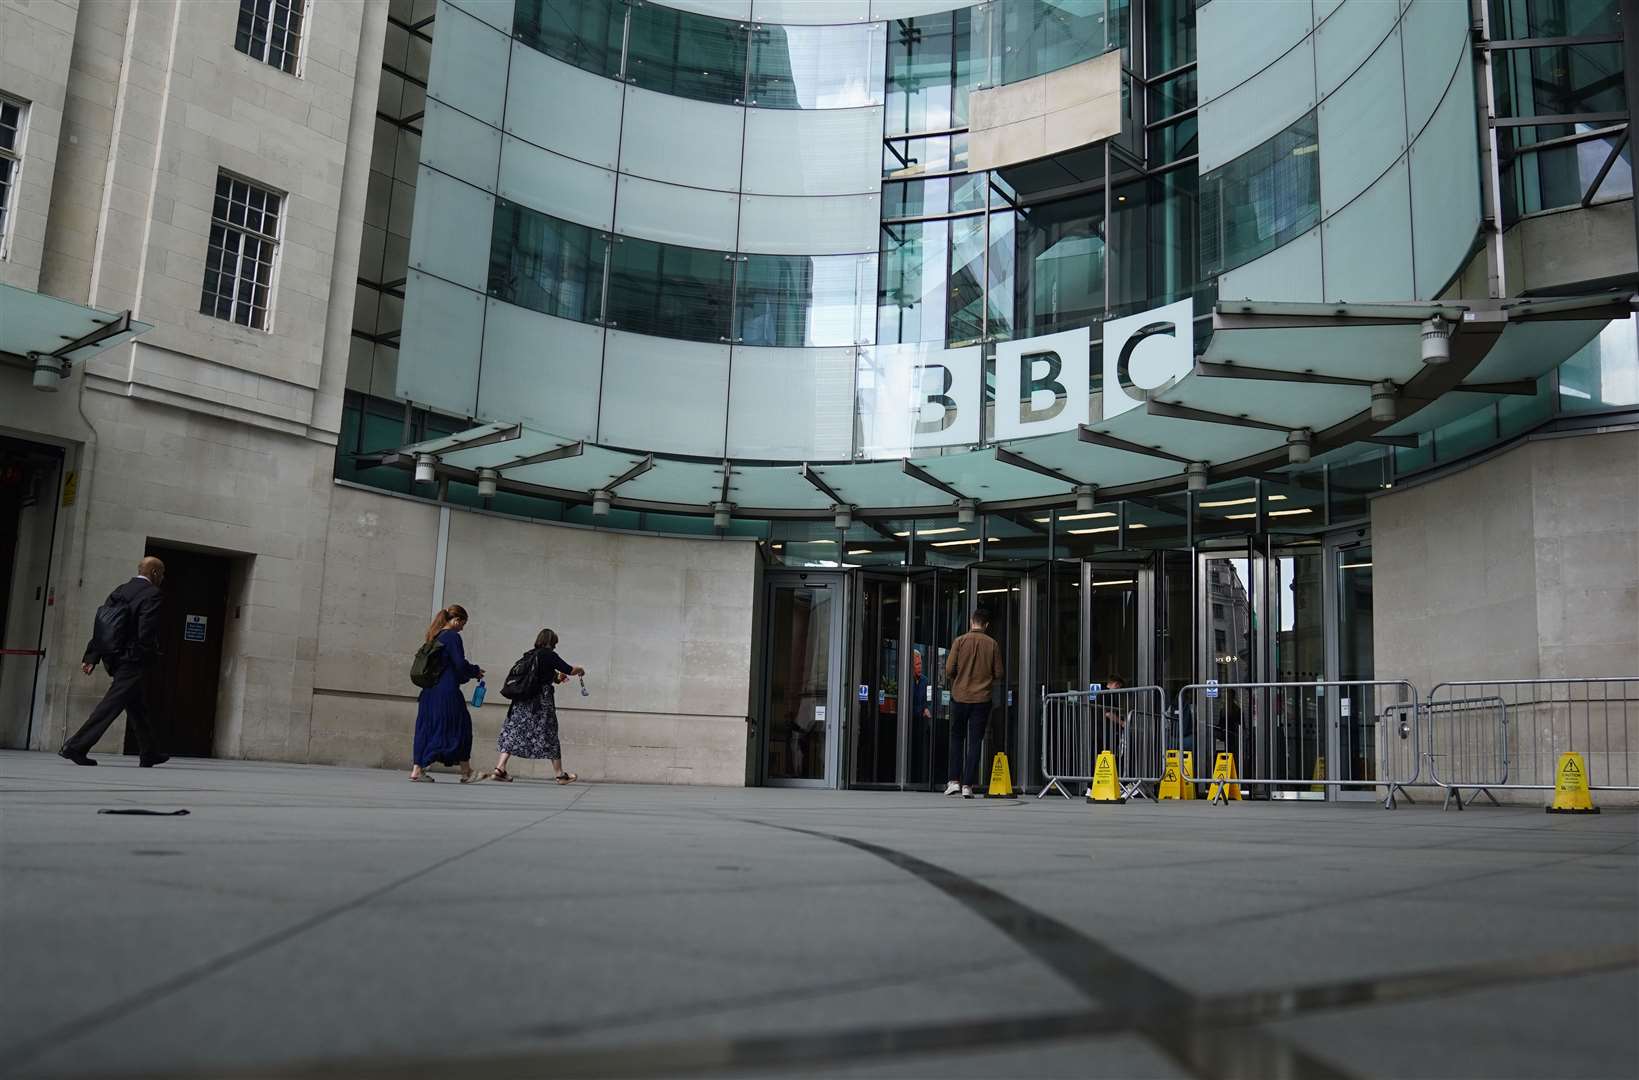 The BBC’s director-general has said it is ‘important’ that the work on the internal investigation now continues (James Manning/PA)